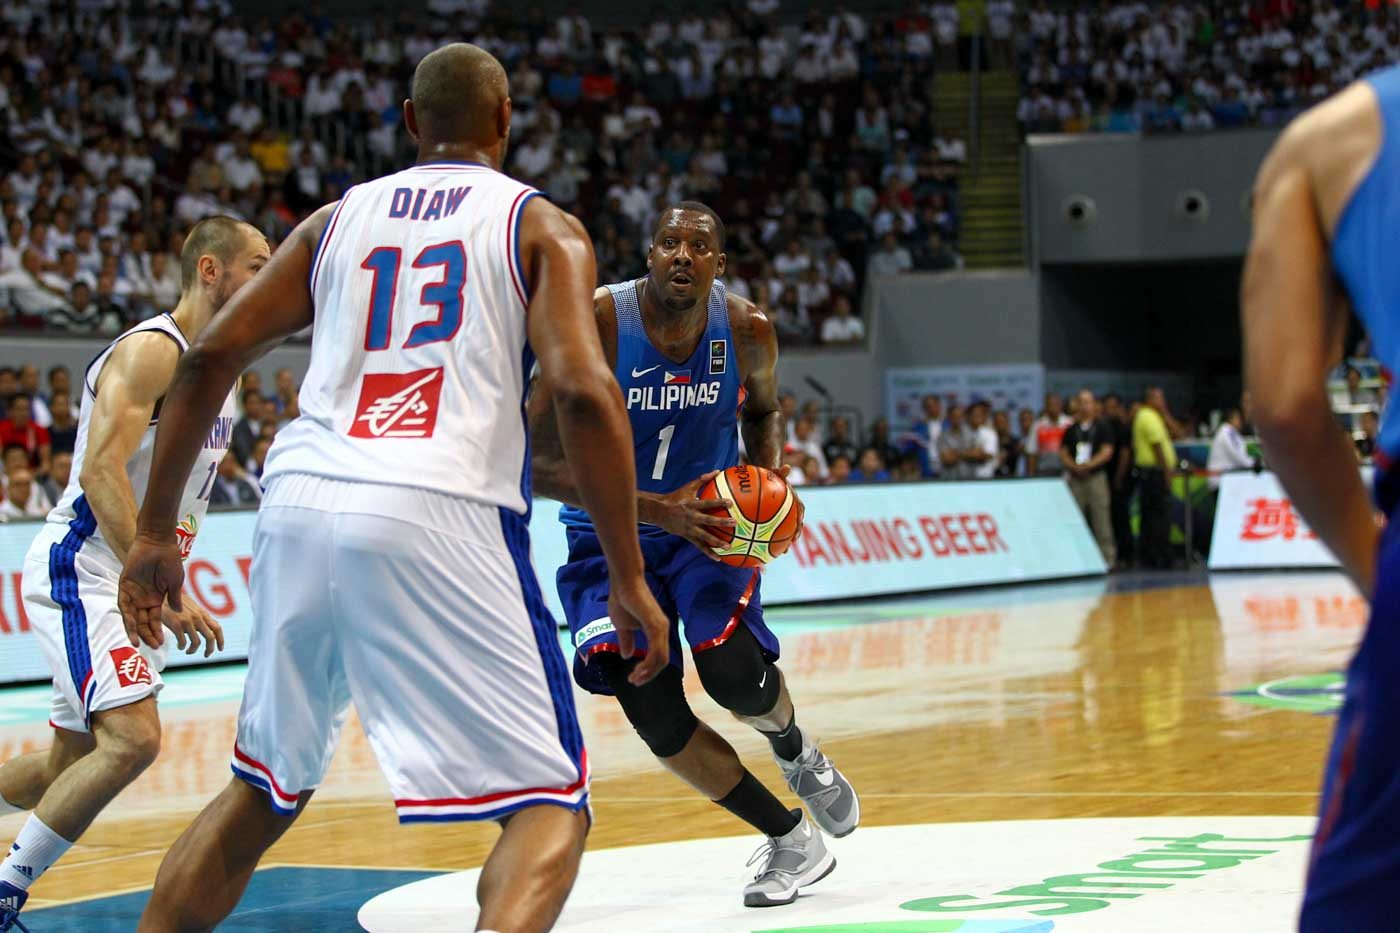 Disappointment as Gilas squanders early lead, falls to France